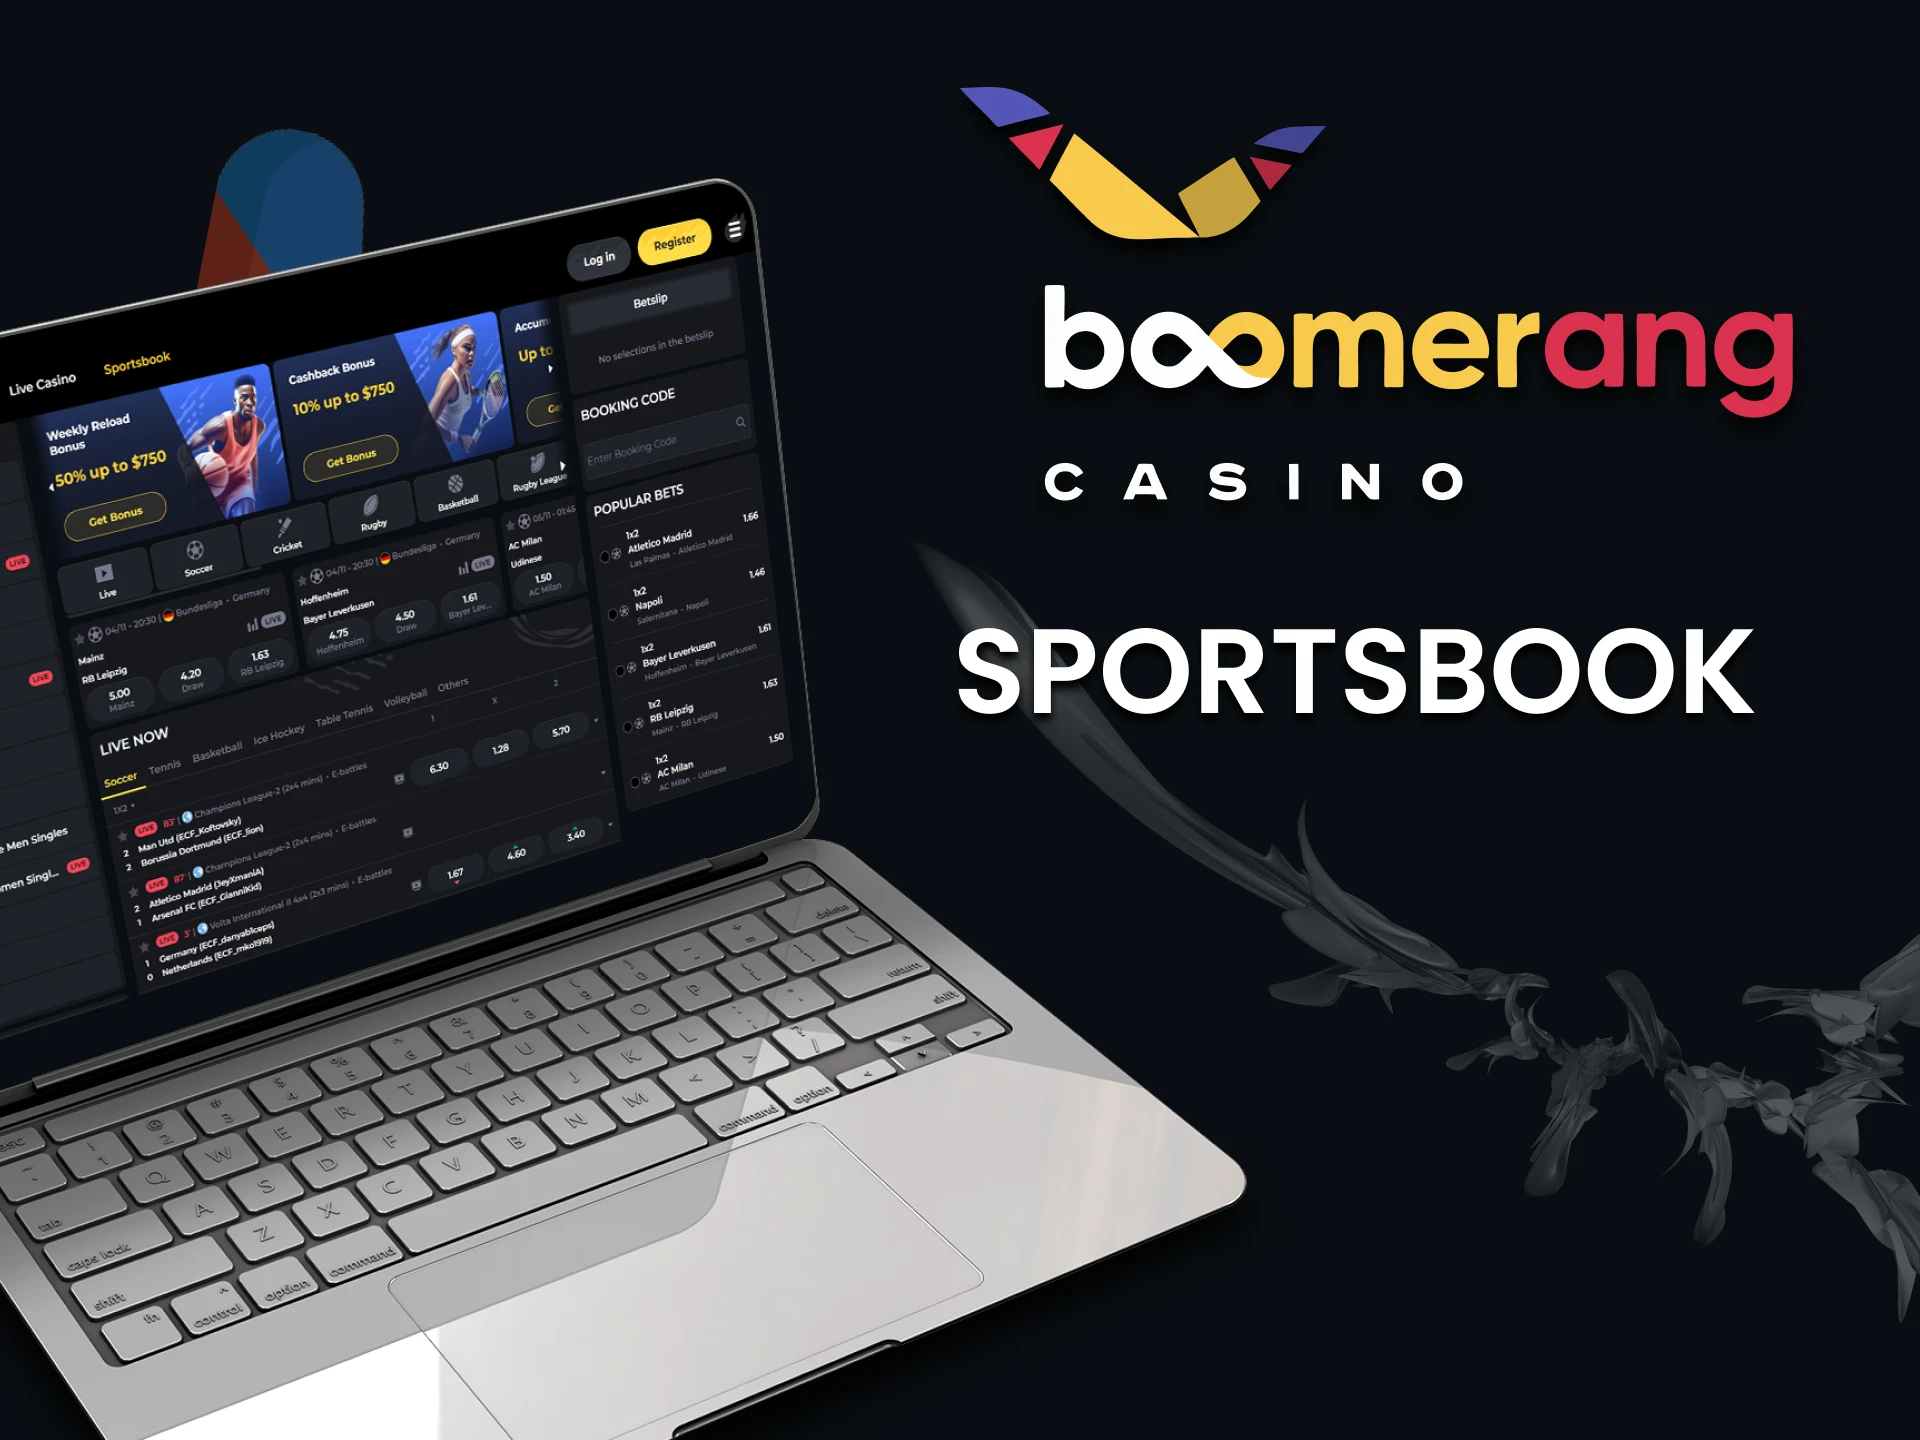 Visit the sports betting page from Boomerang Casino.